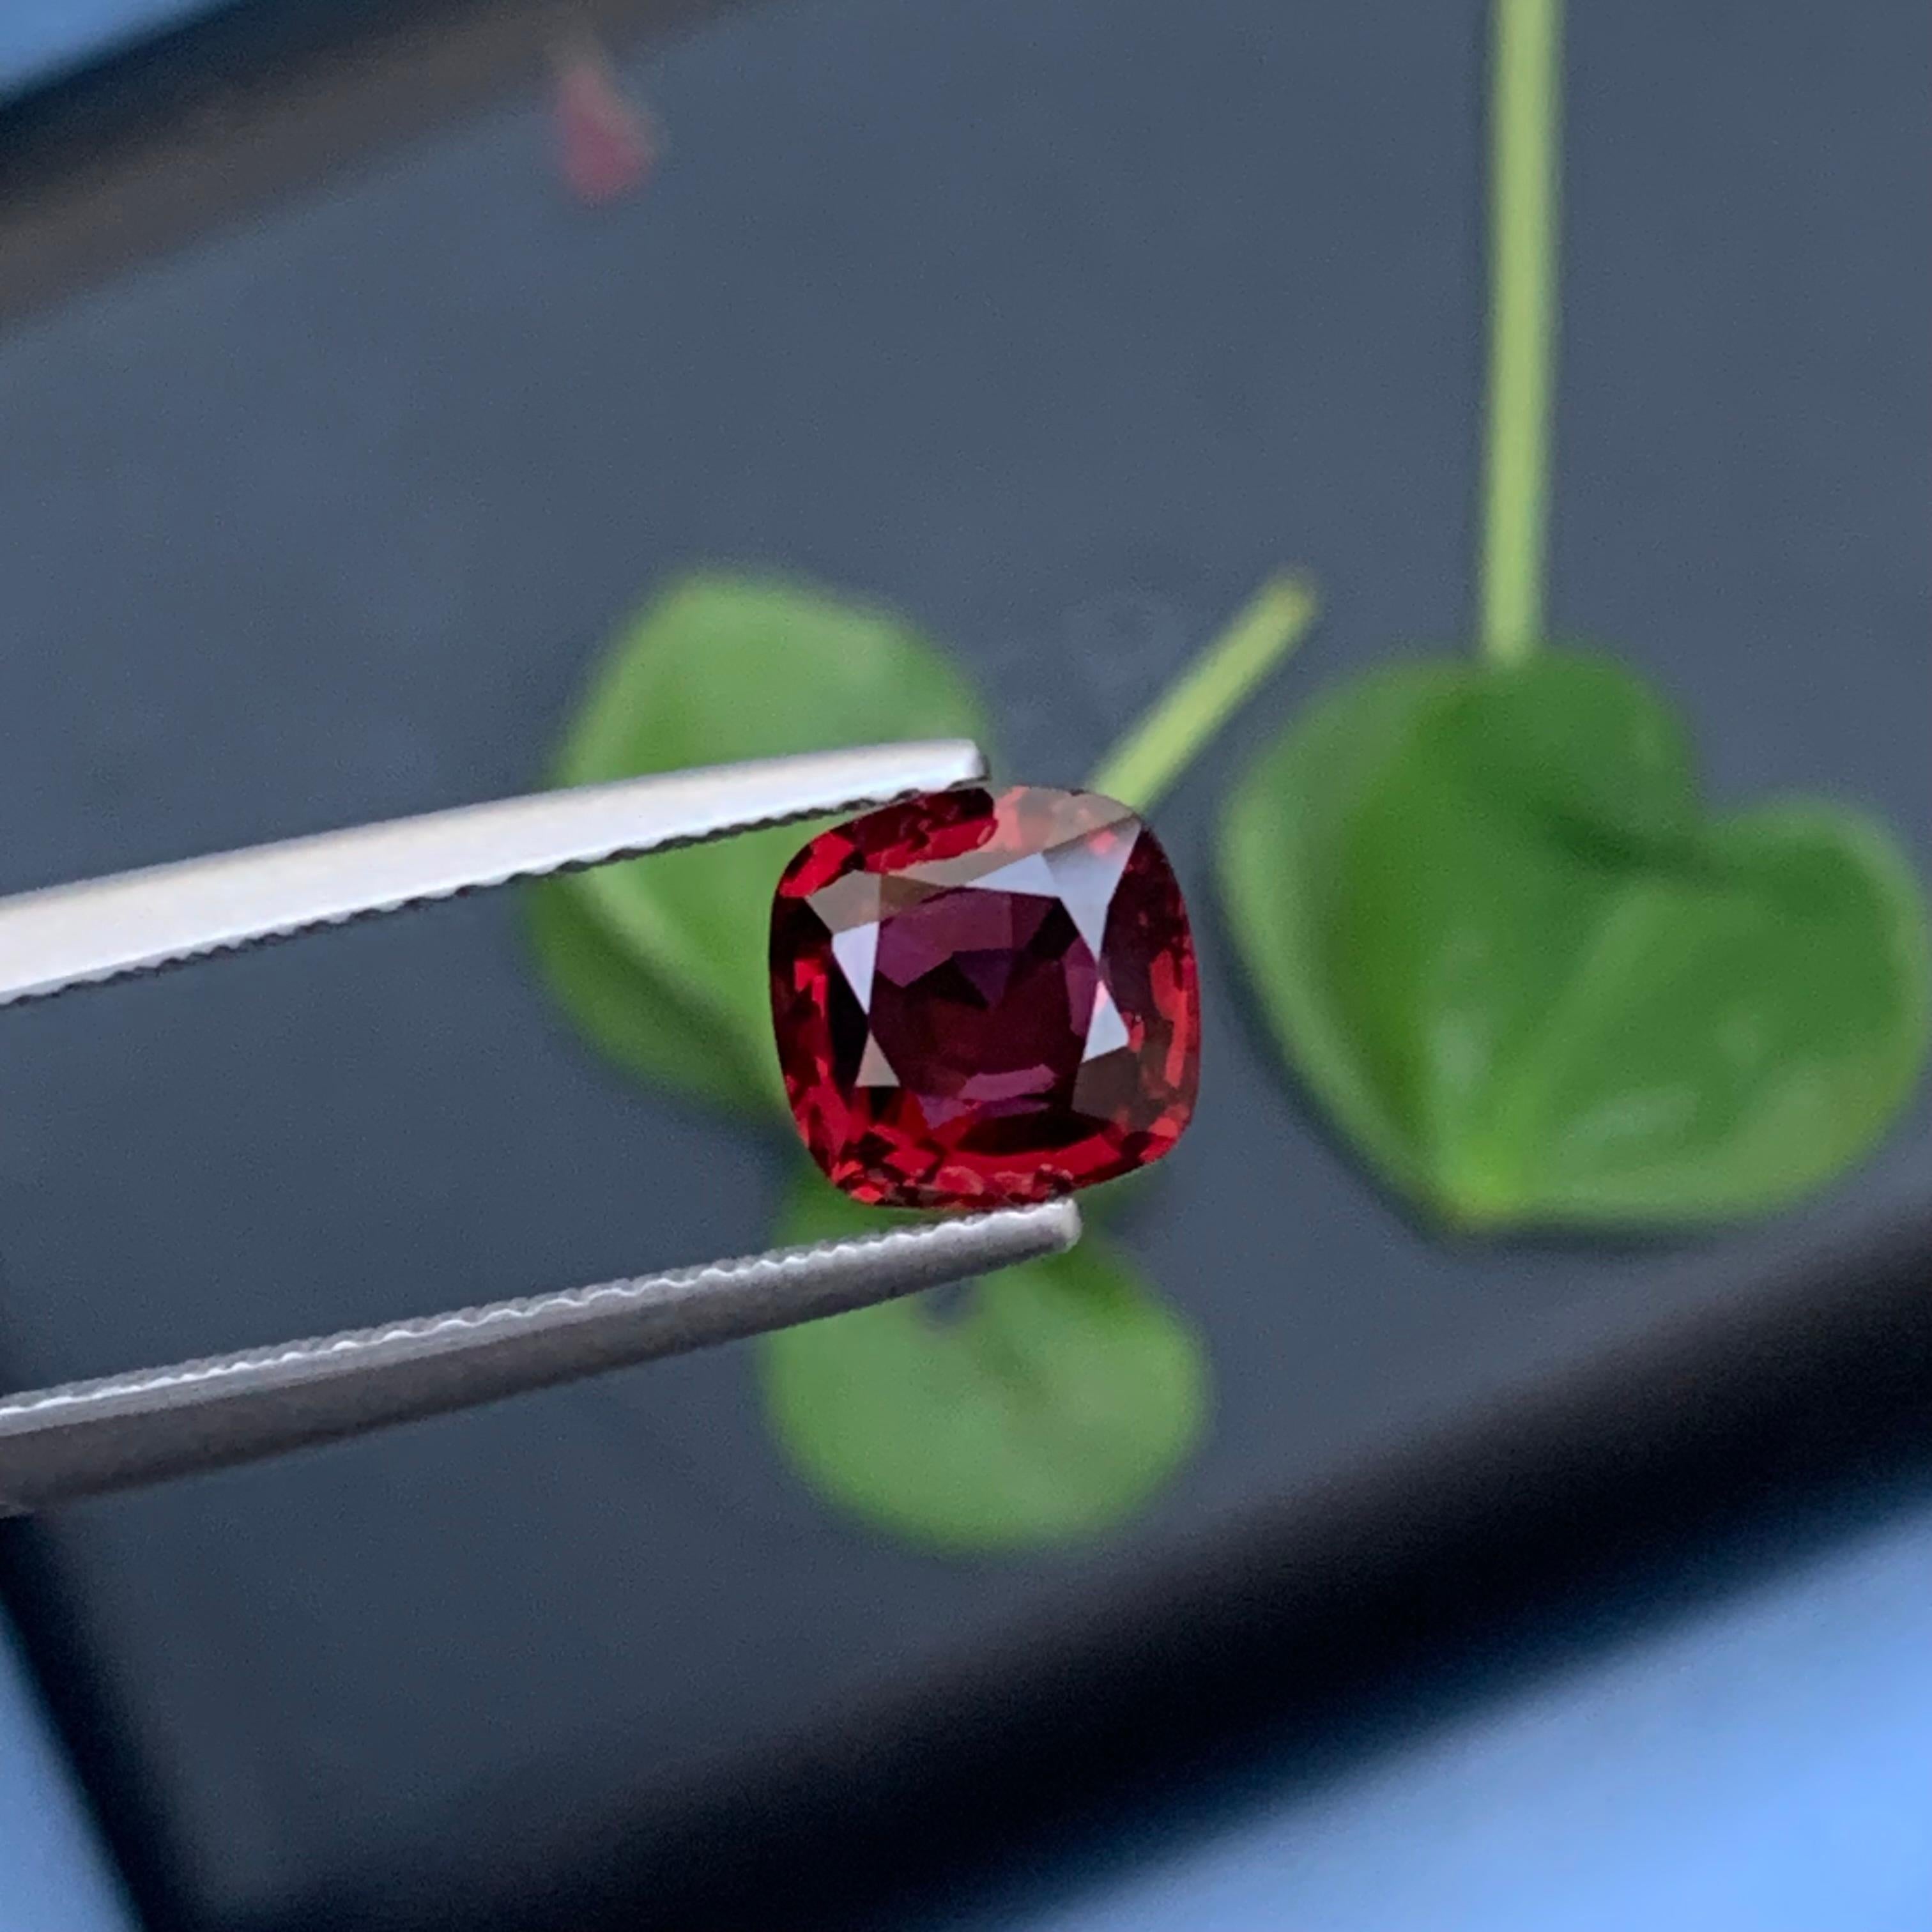 Stunning 1.60 Carat Natural Loose Red Spinel from Myanmar Burma Cushion Shape 1